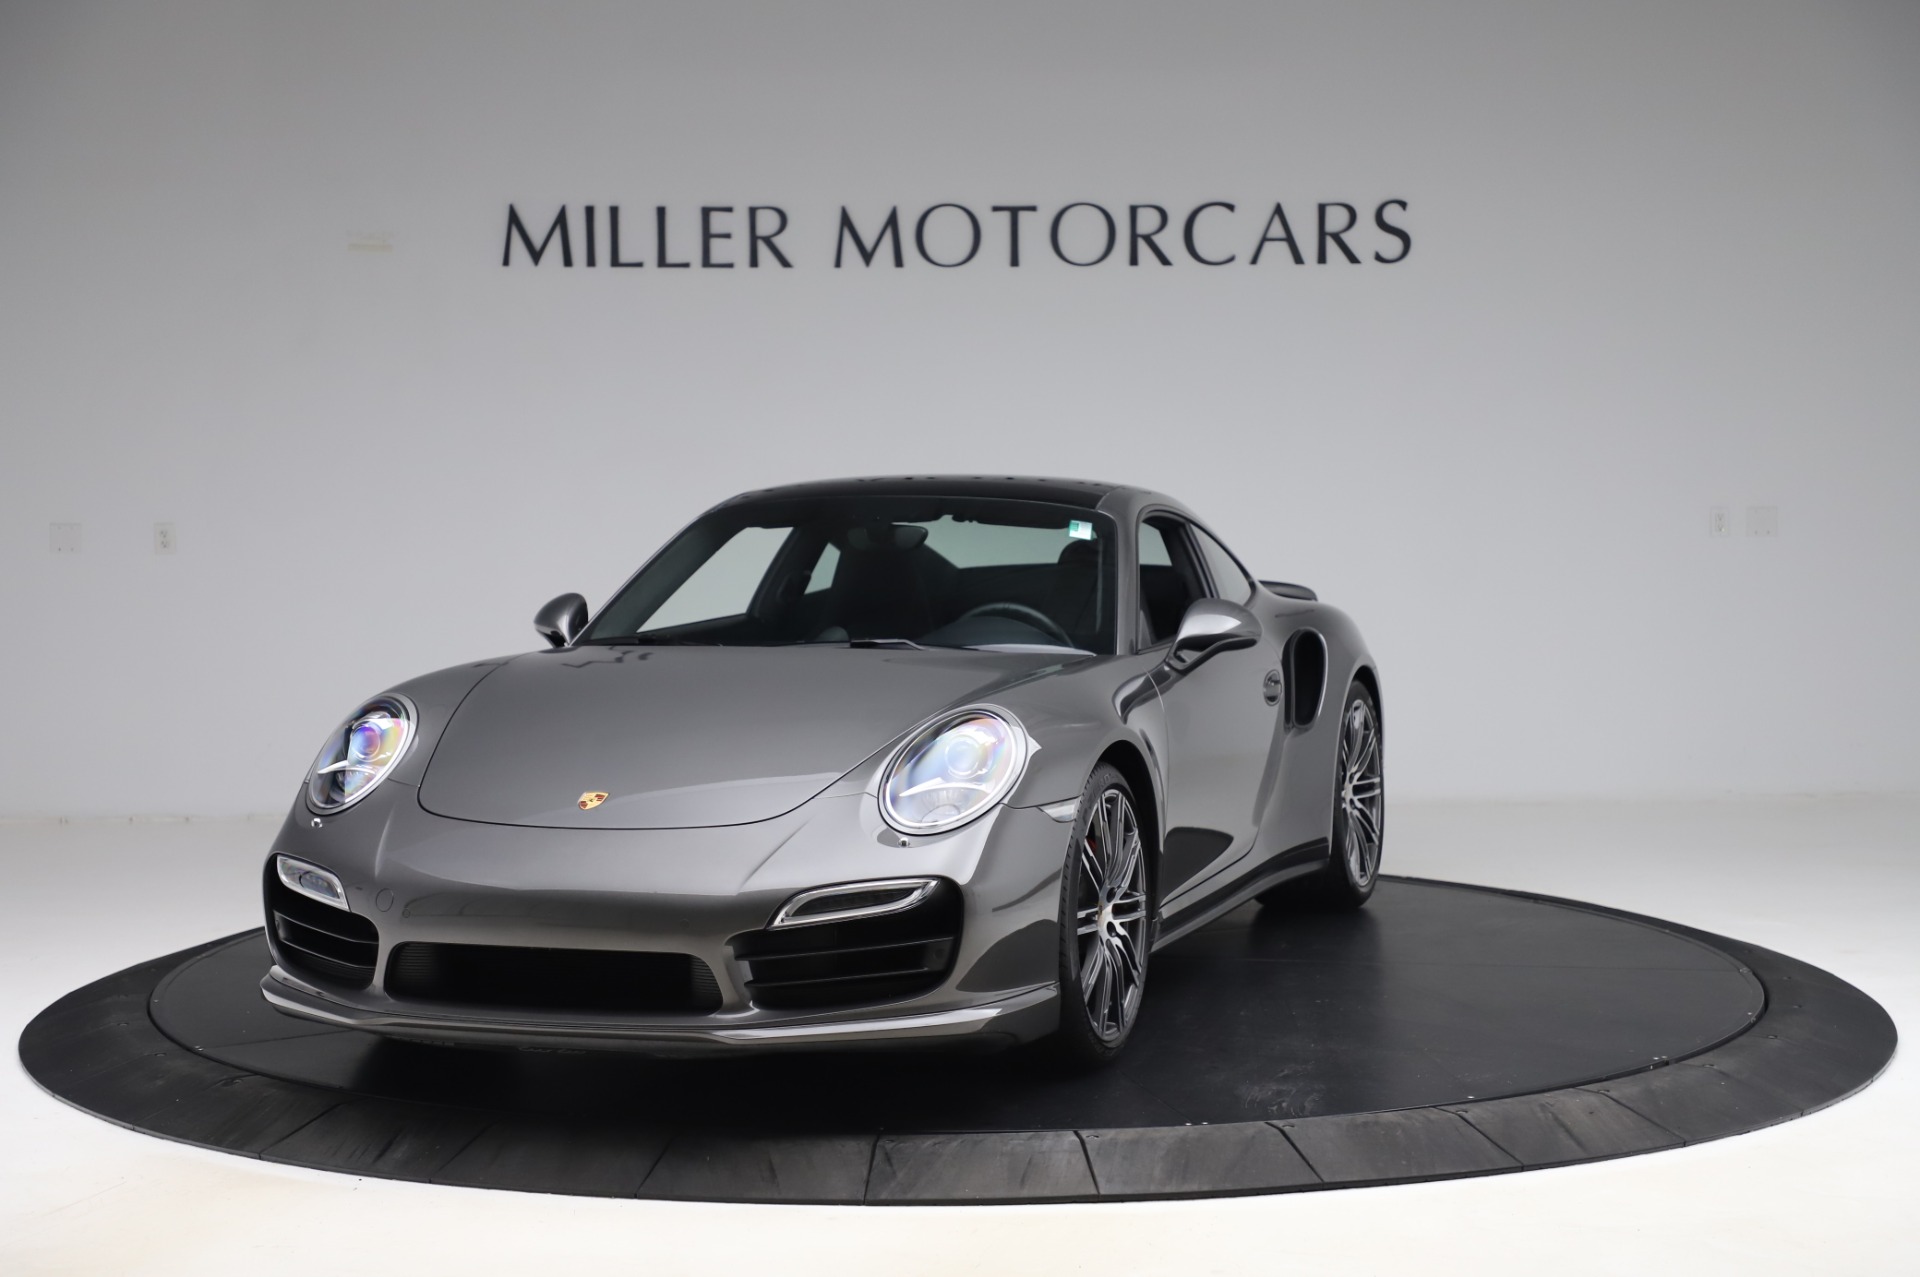 Used 2015 Porsche 911 Turbo for sale Sold at Maserati of Greenwich in Greenwich CT 06830 1